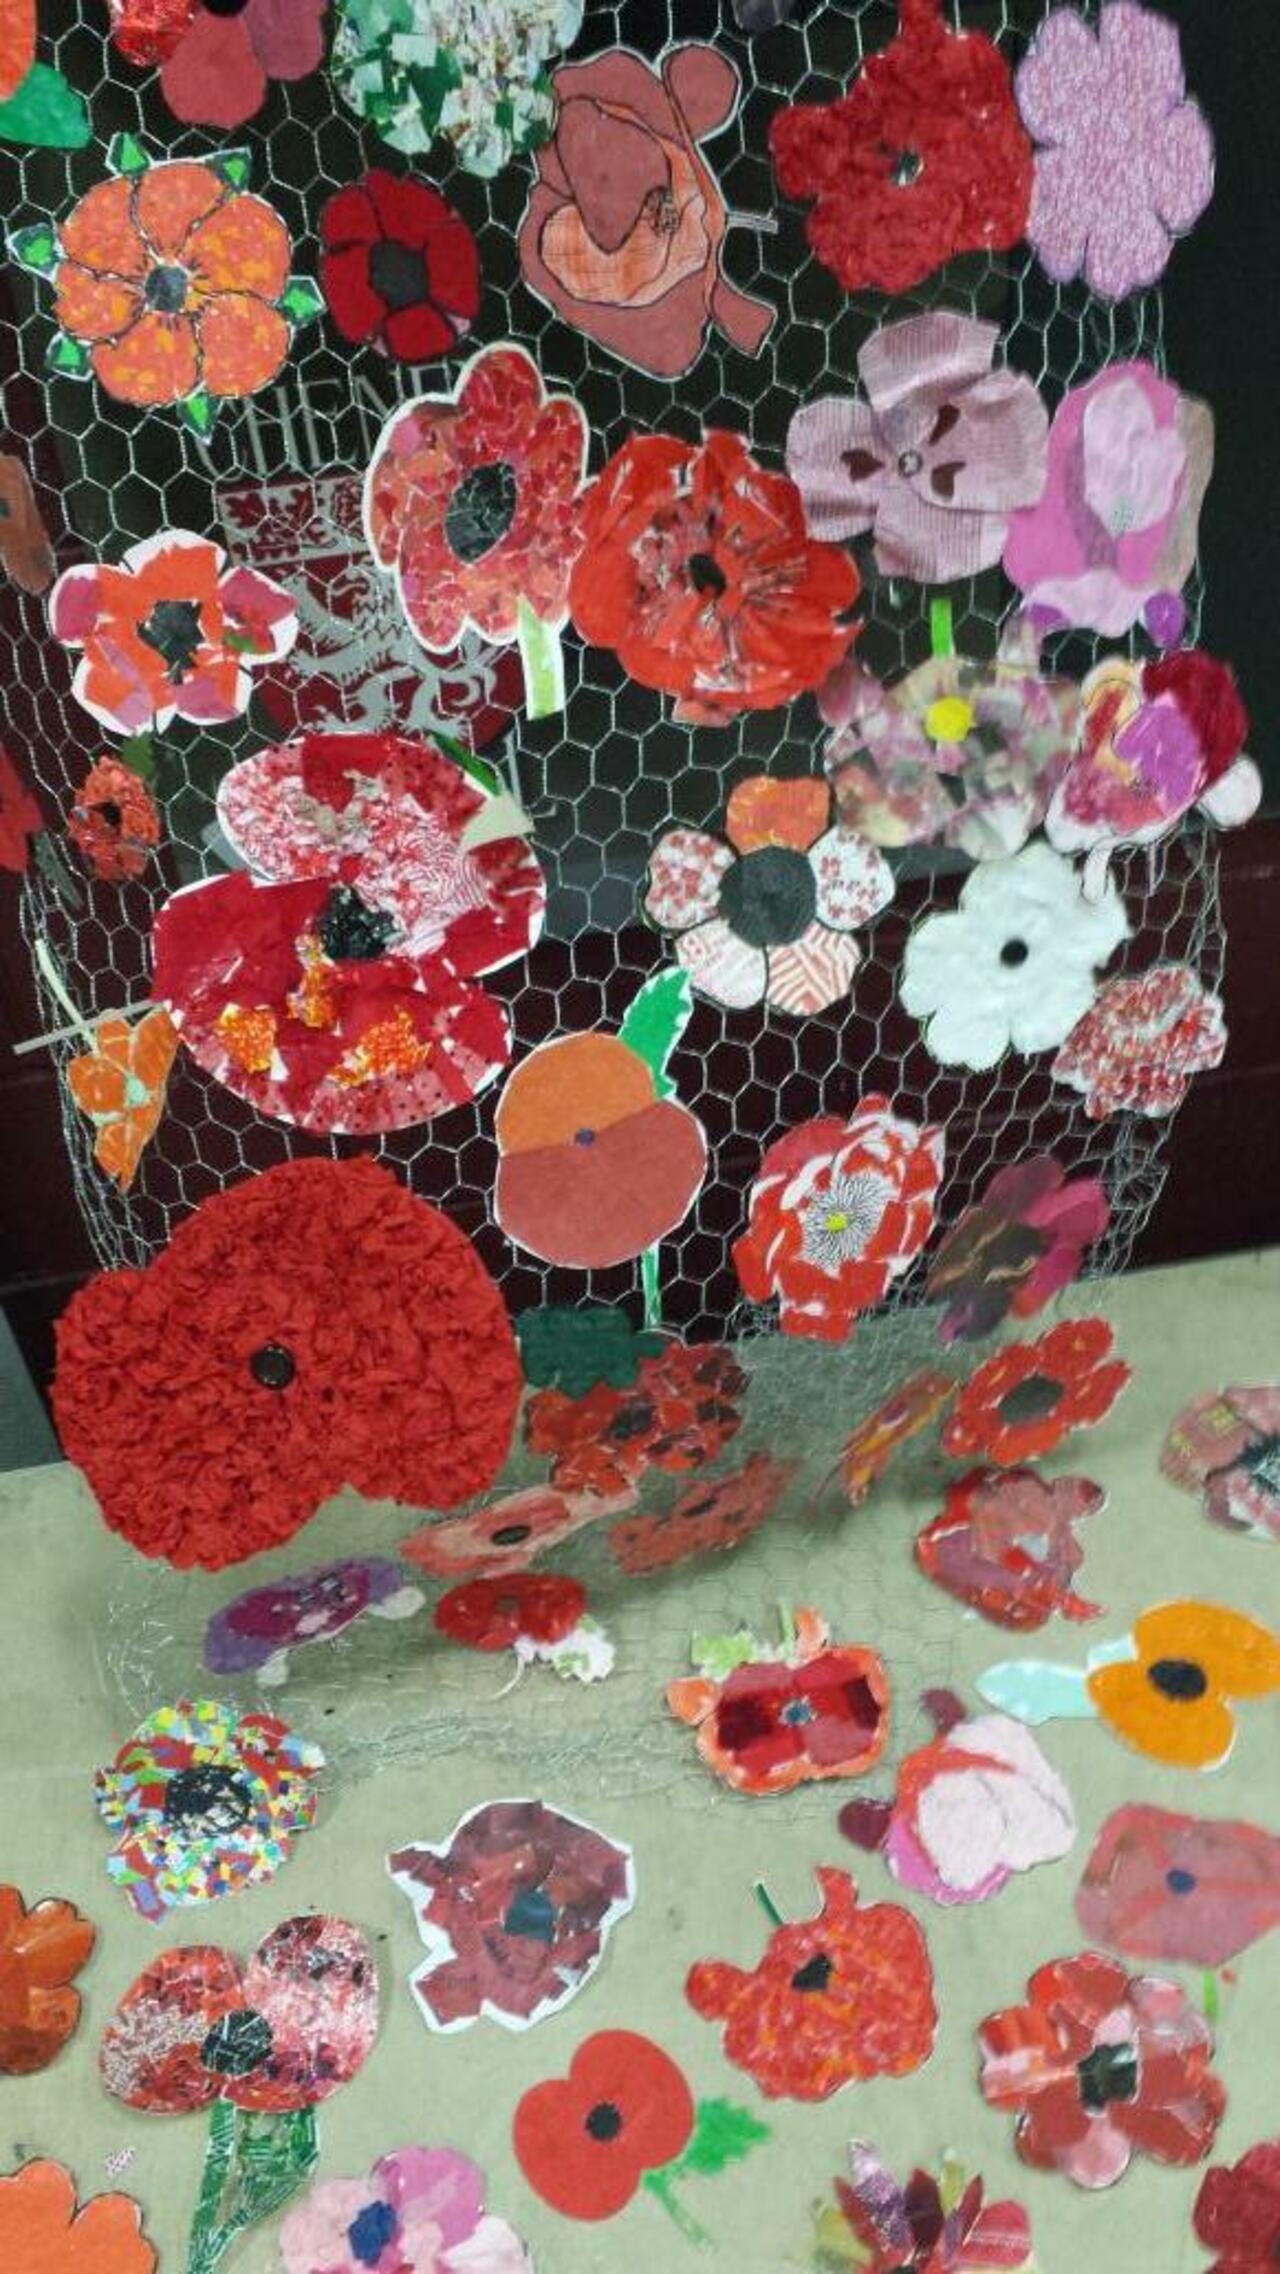 poppies installed for our remembrance assembly this afternoon #art http://t.co/pRYXM6EZfJ